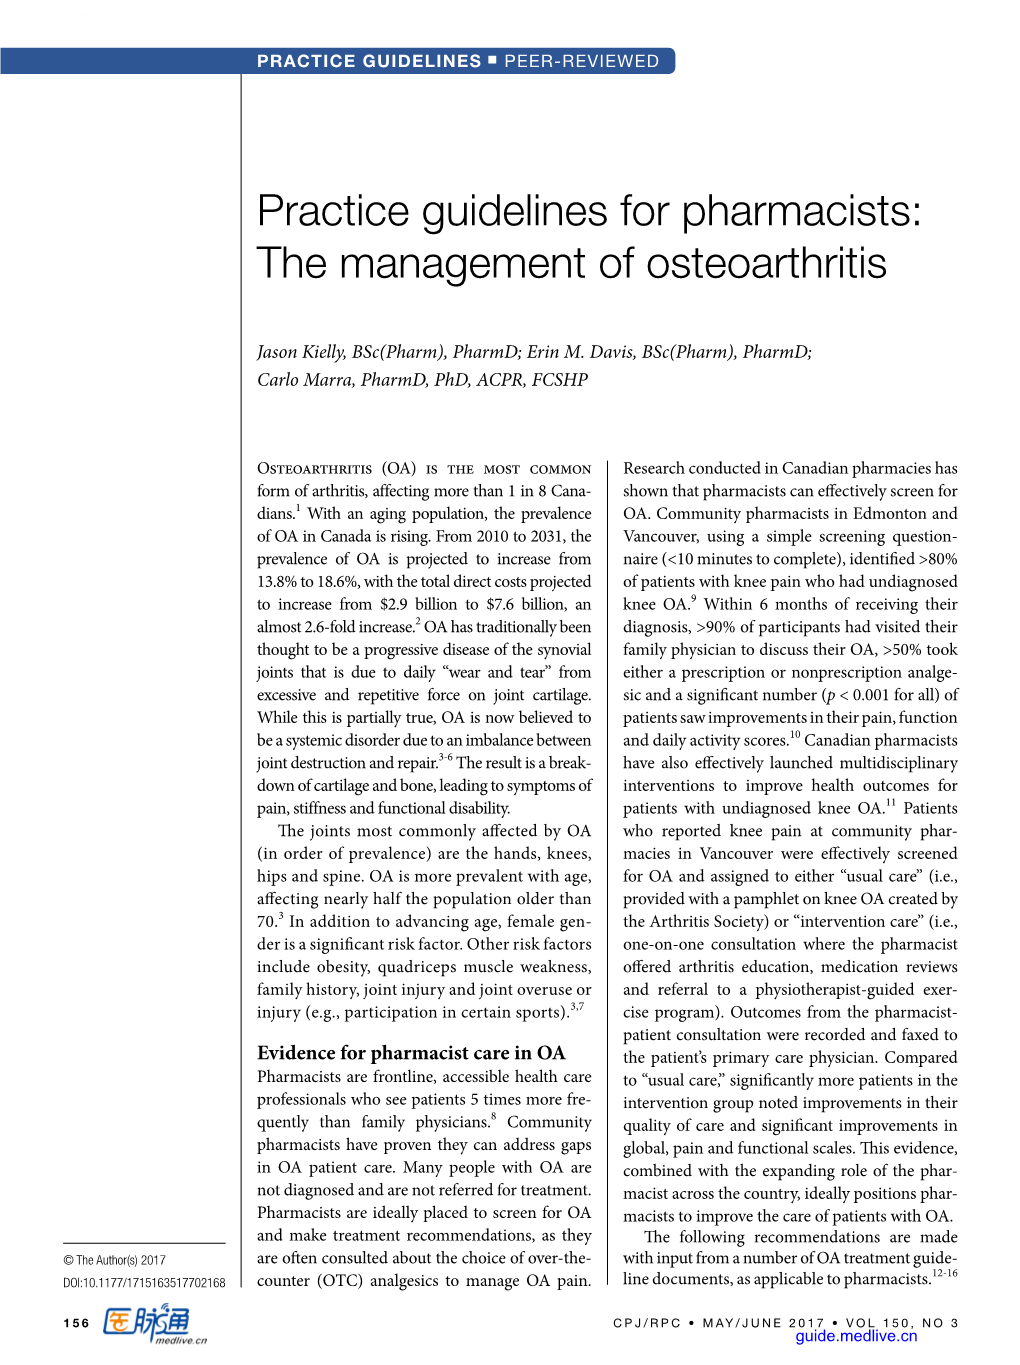 Practice Guidelines for Pharmacists: the Management of Osteoarthritis